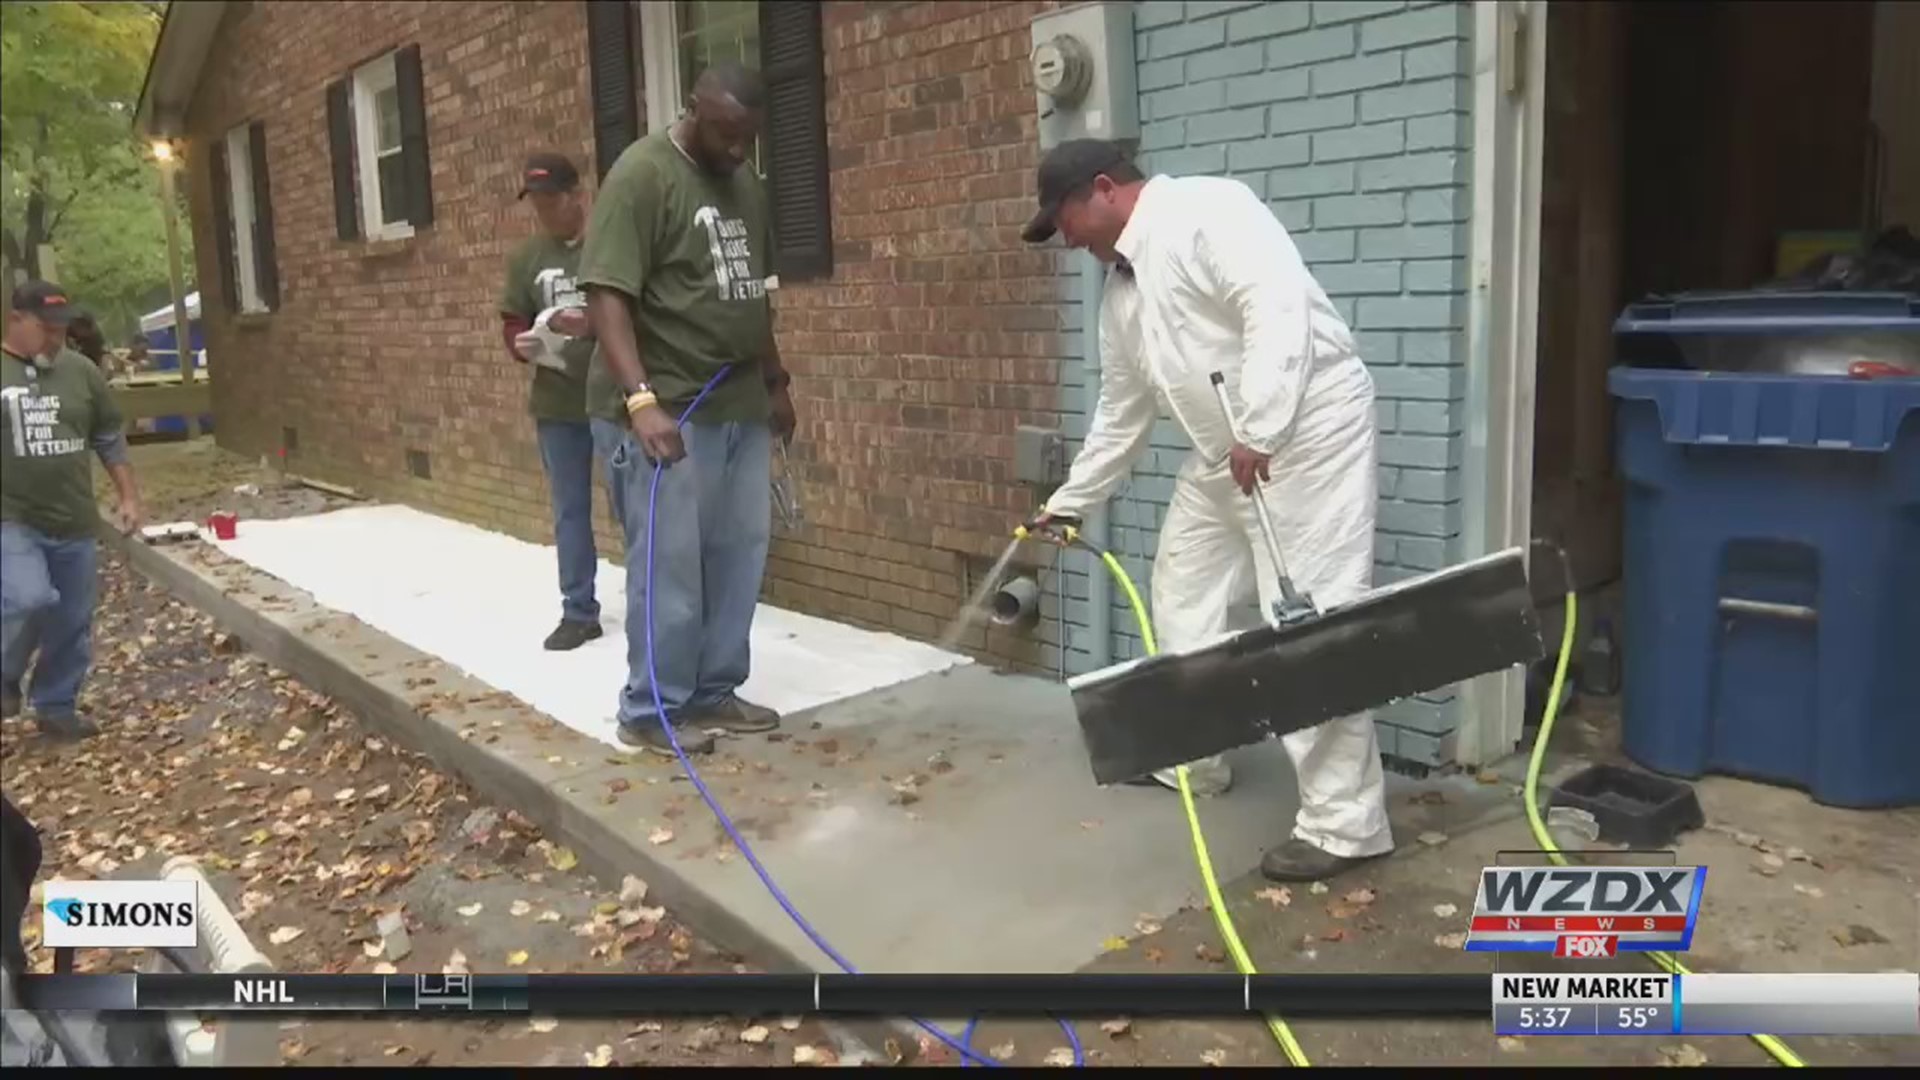 A wounded veteran is getting some major updates and repairs to his home, thanks to the help of some local groups. Bearded Warriors and Home Depot are partnering up on a Celebration of Service project for Matthew Akin, who was wounded while serving in 2014. The work is made possible through a $25,000 grant.